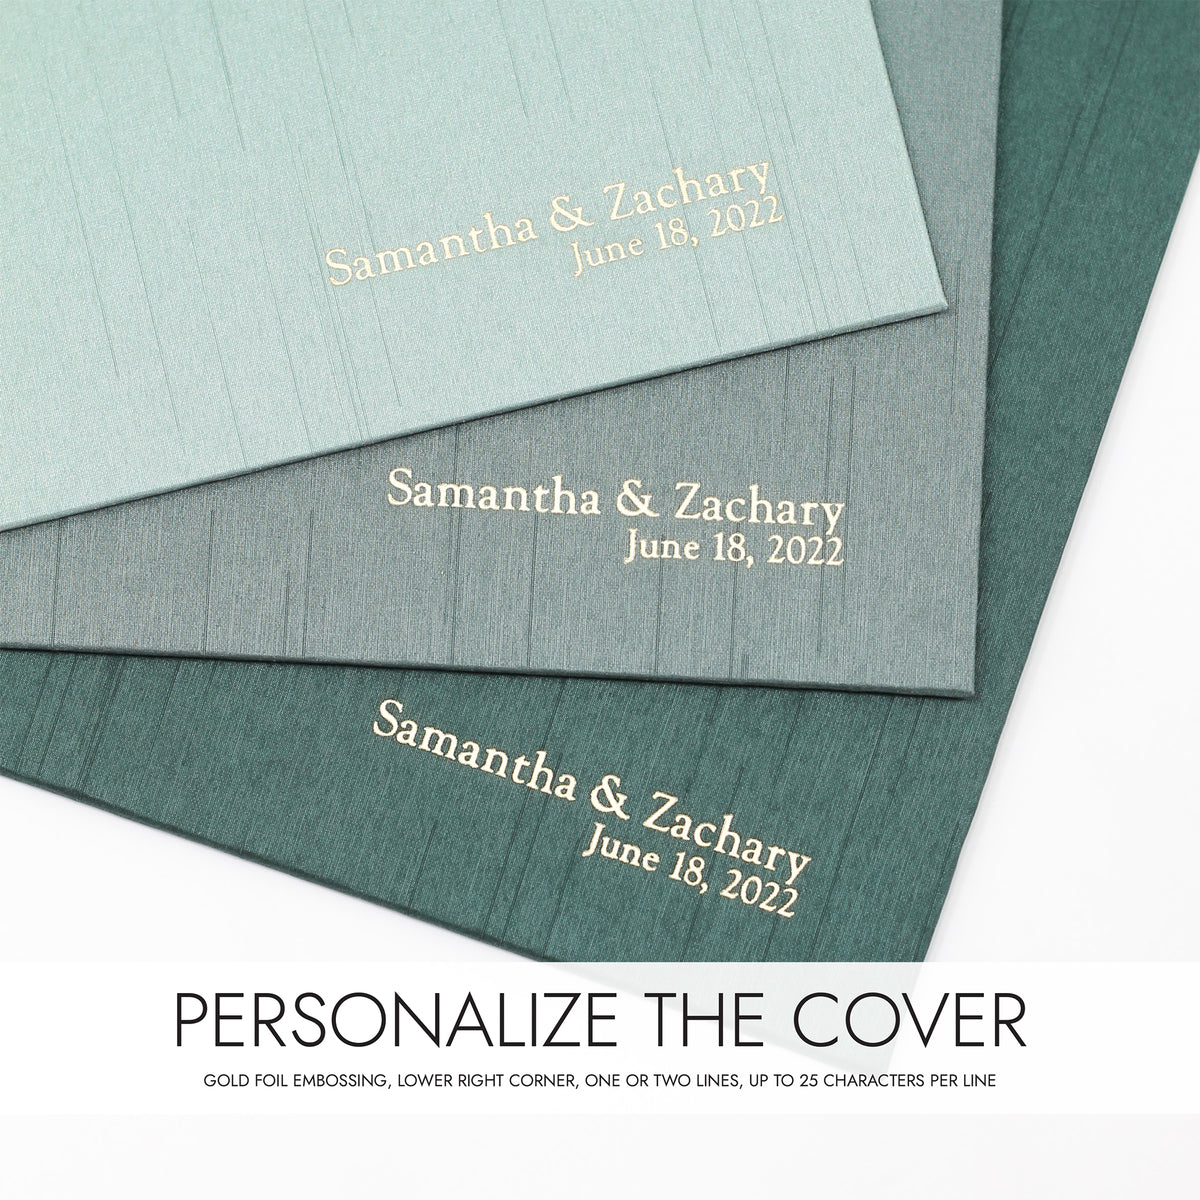 Medium 5.5x8.5 Blank Page Journal | Cover: Teal Blue Silk | Available Personalized